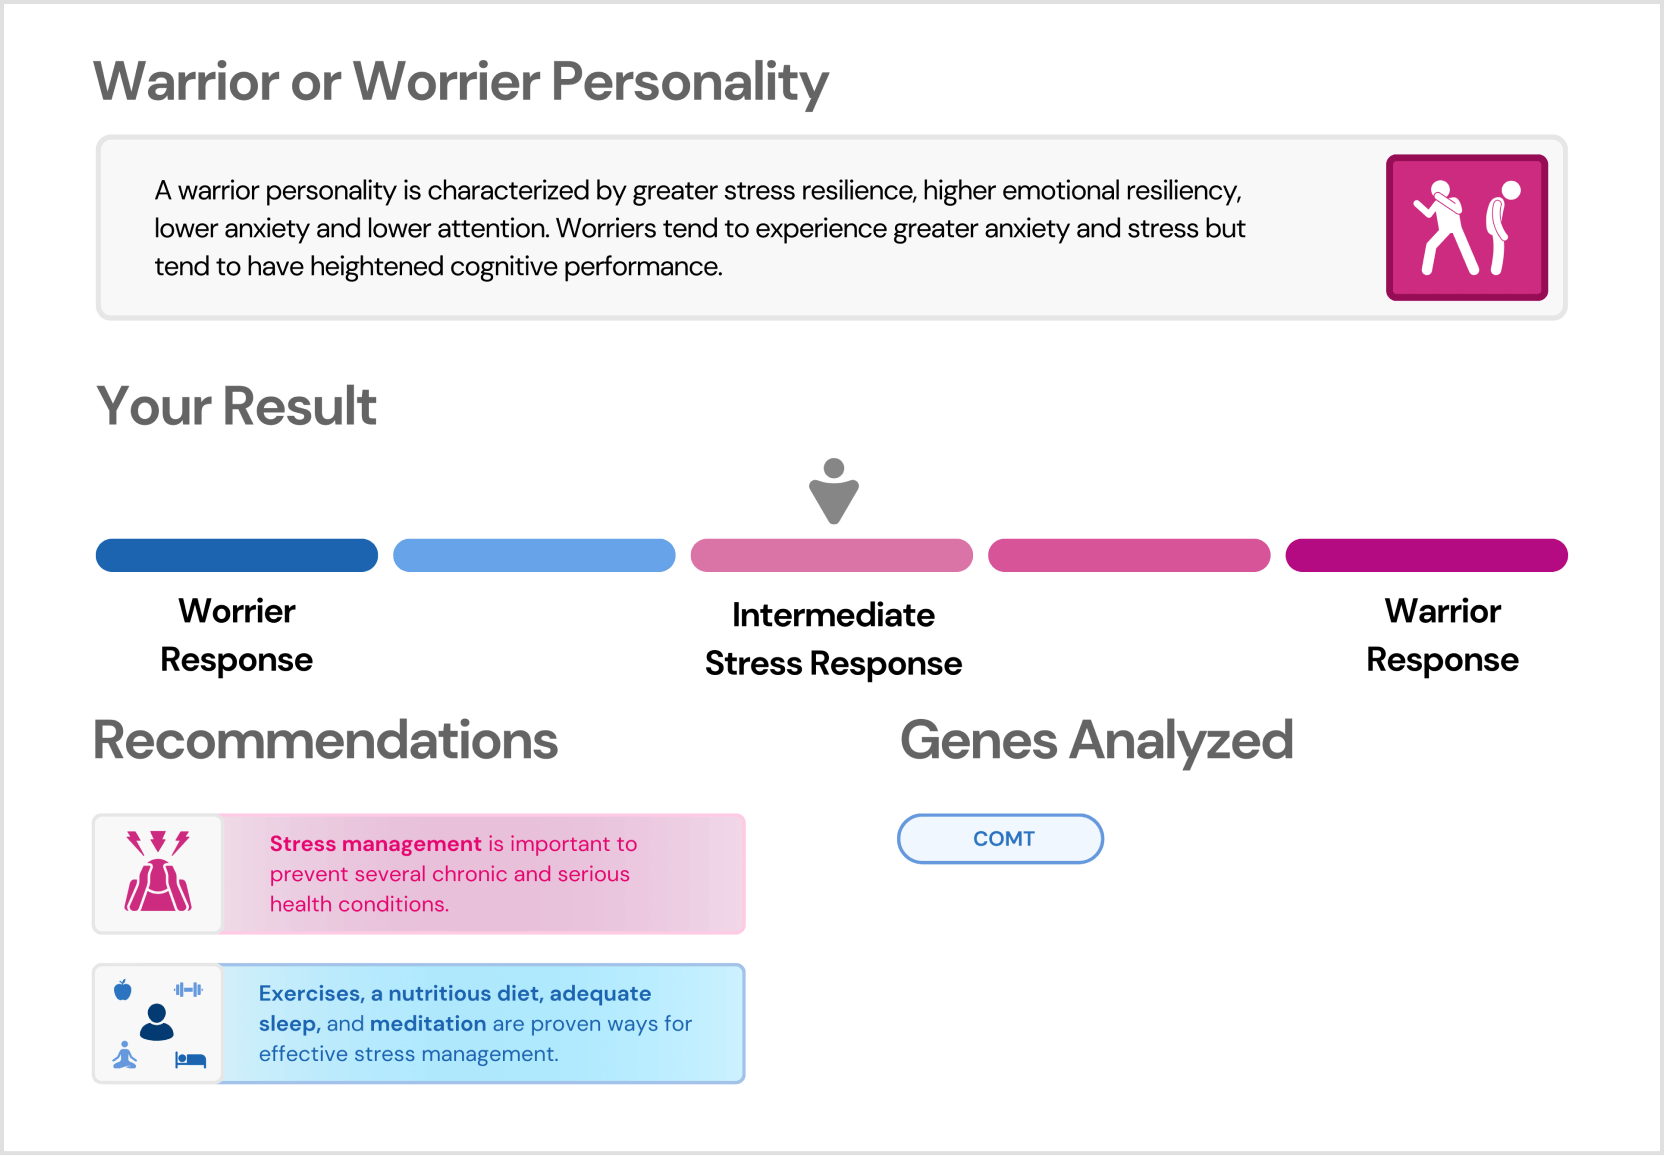 Traits and Personality_Warrior or worrier personality